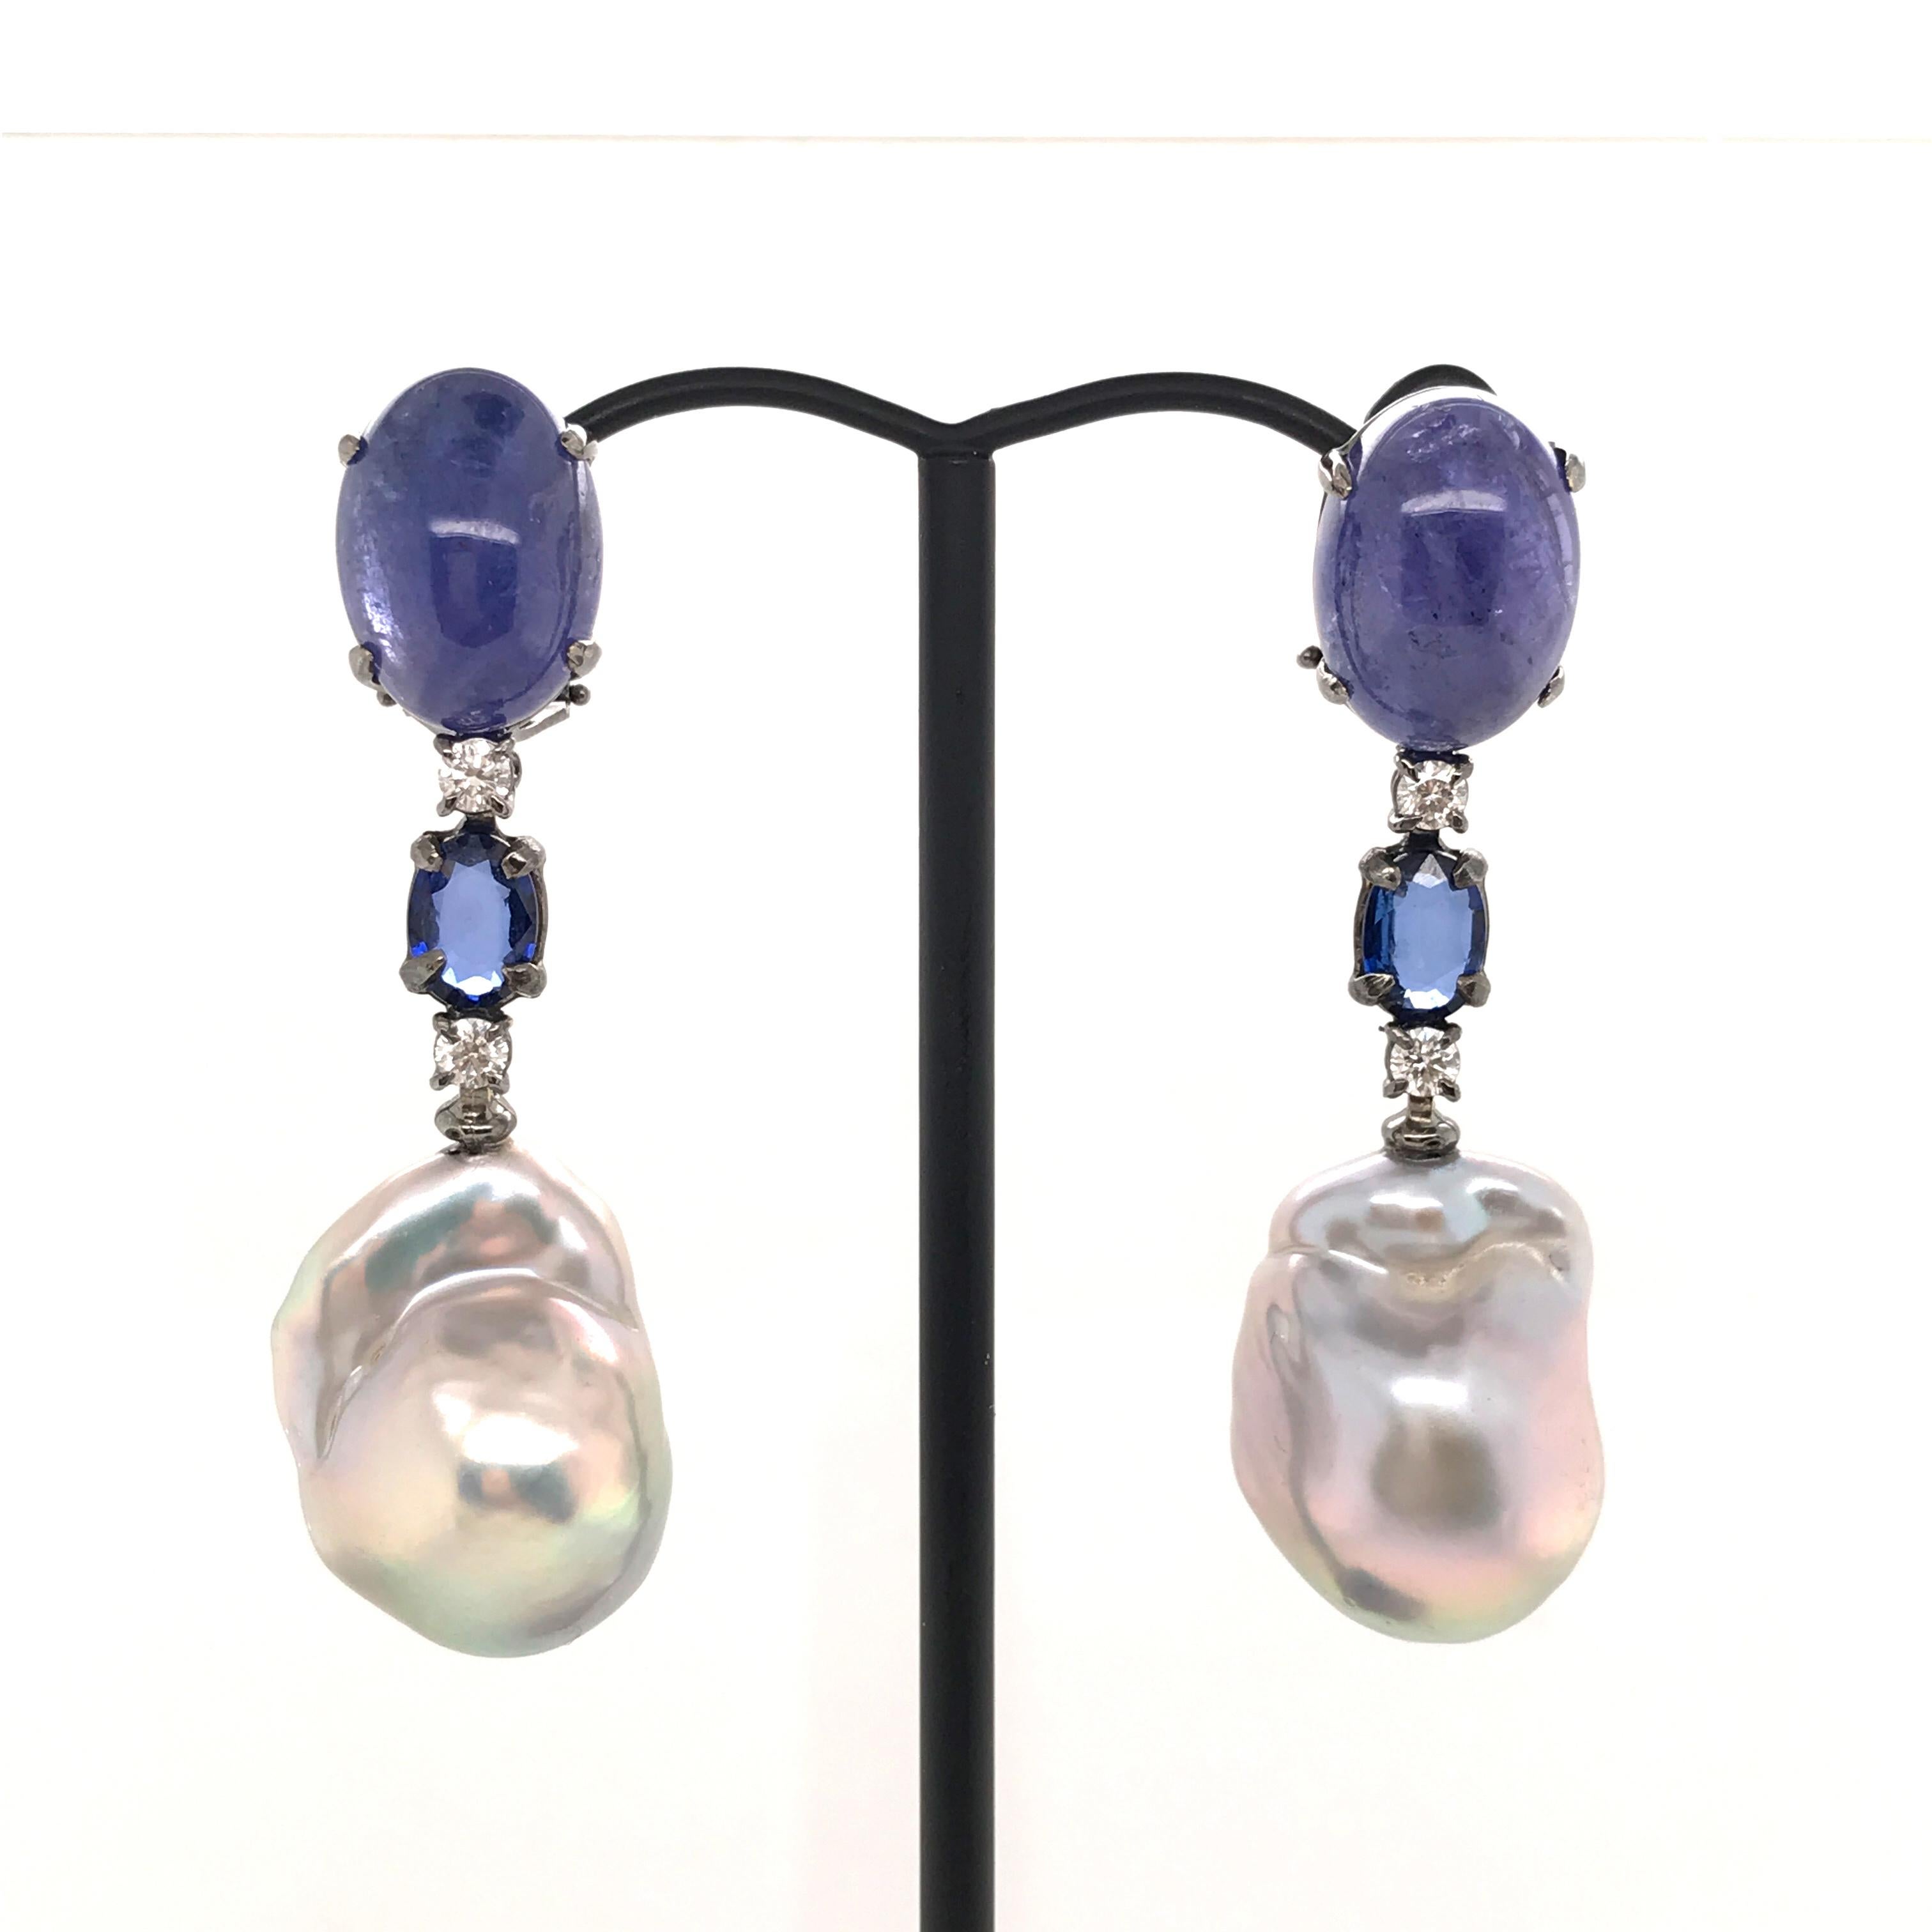 Natural Tanzanite Blue Sapphire and diamonds on Black Gold 18 k Chandelier Earrings 
2 Tanzanite, 
2 Blue Sapphire 
2 diamonds 0.28 ct Color G purity VS
Black Gold 18 k weight 5 grams
Chandelier Earrings
Can be adapted to ear not pierced